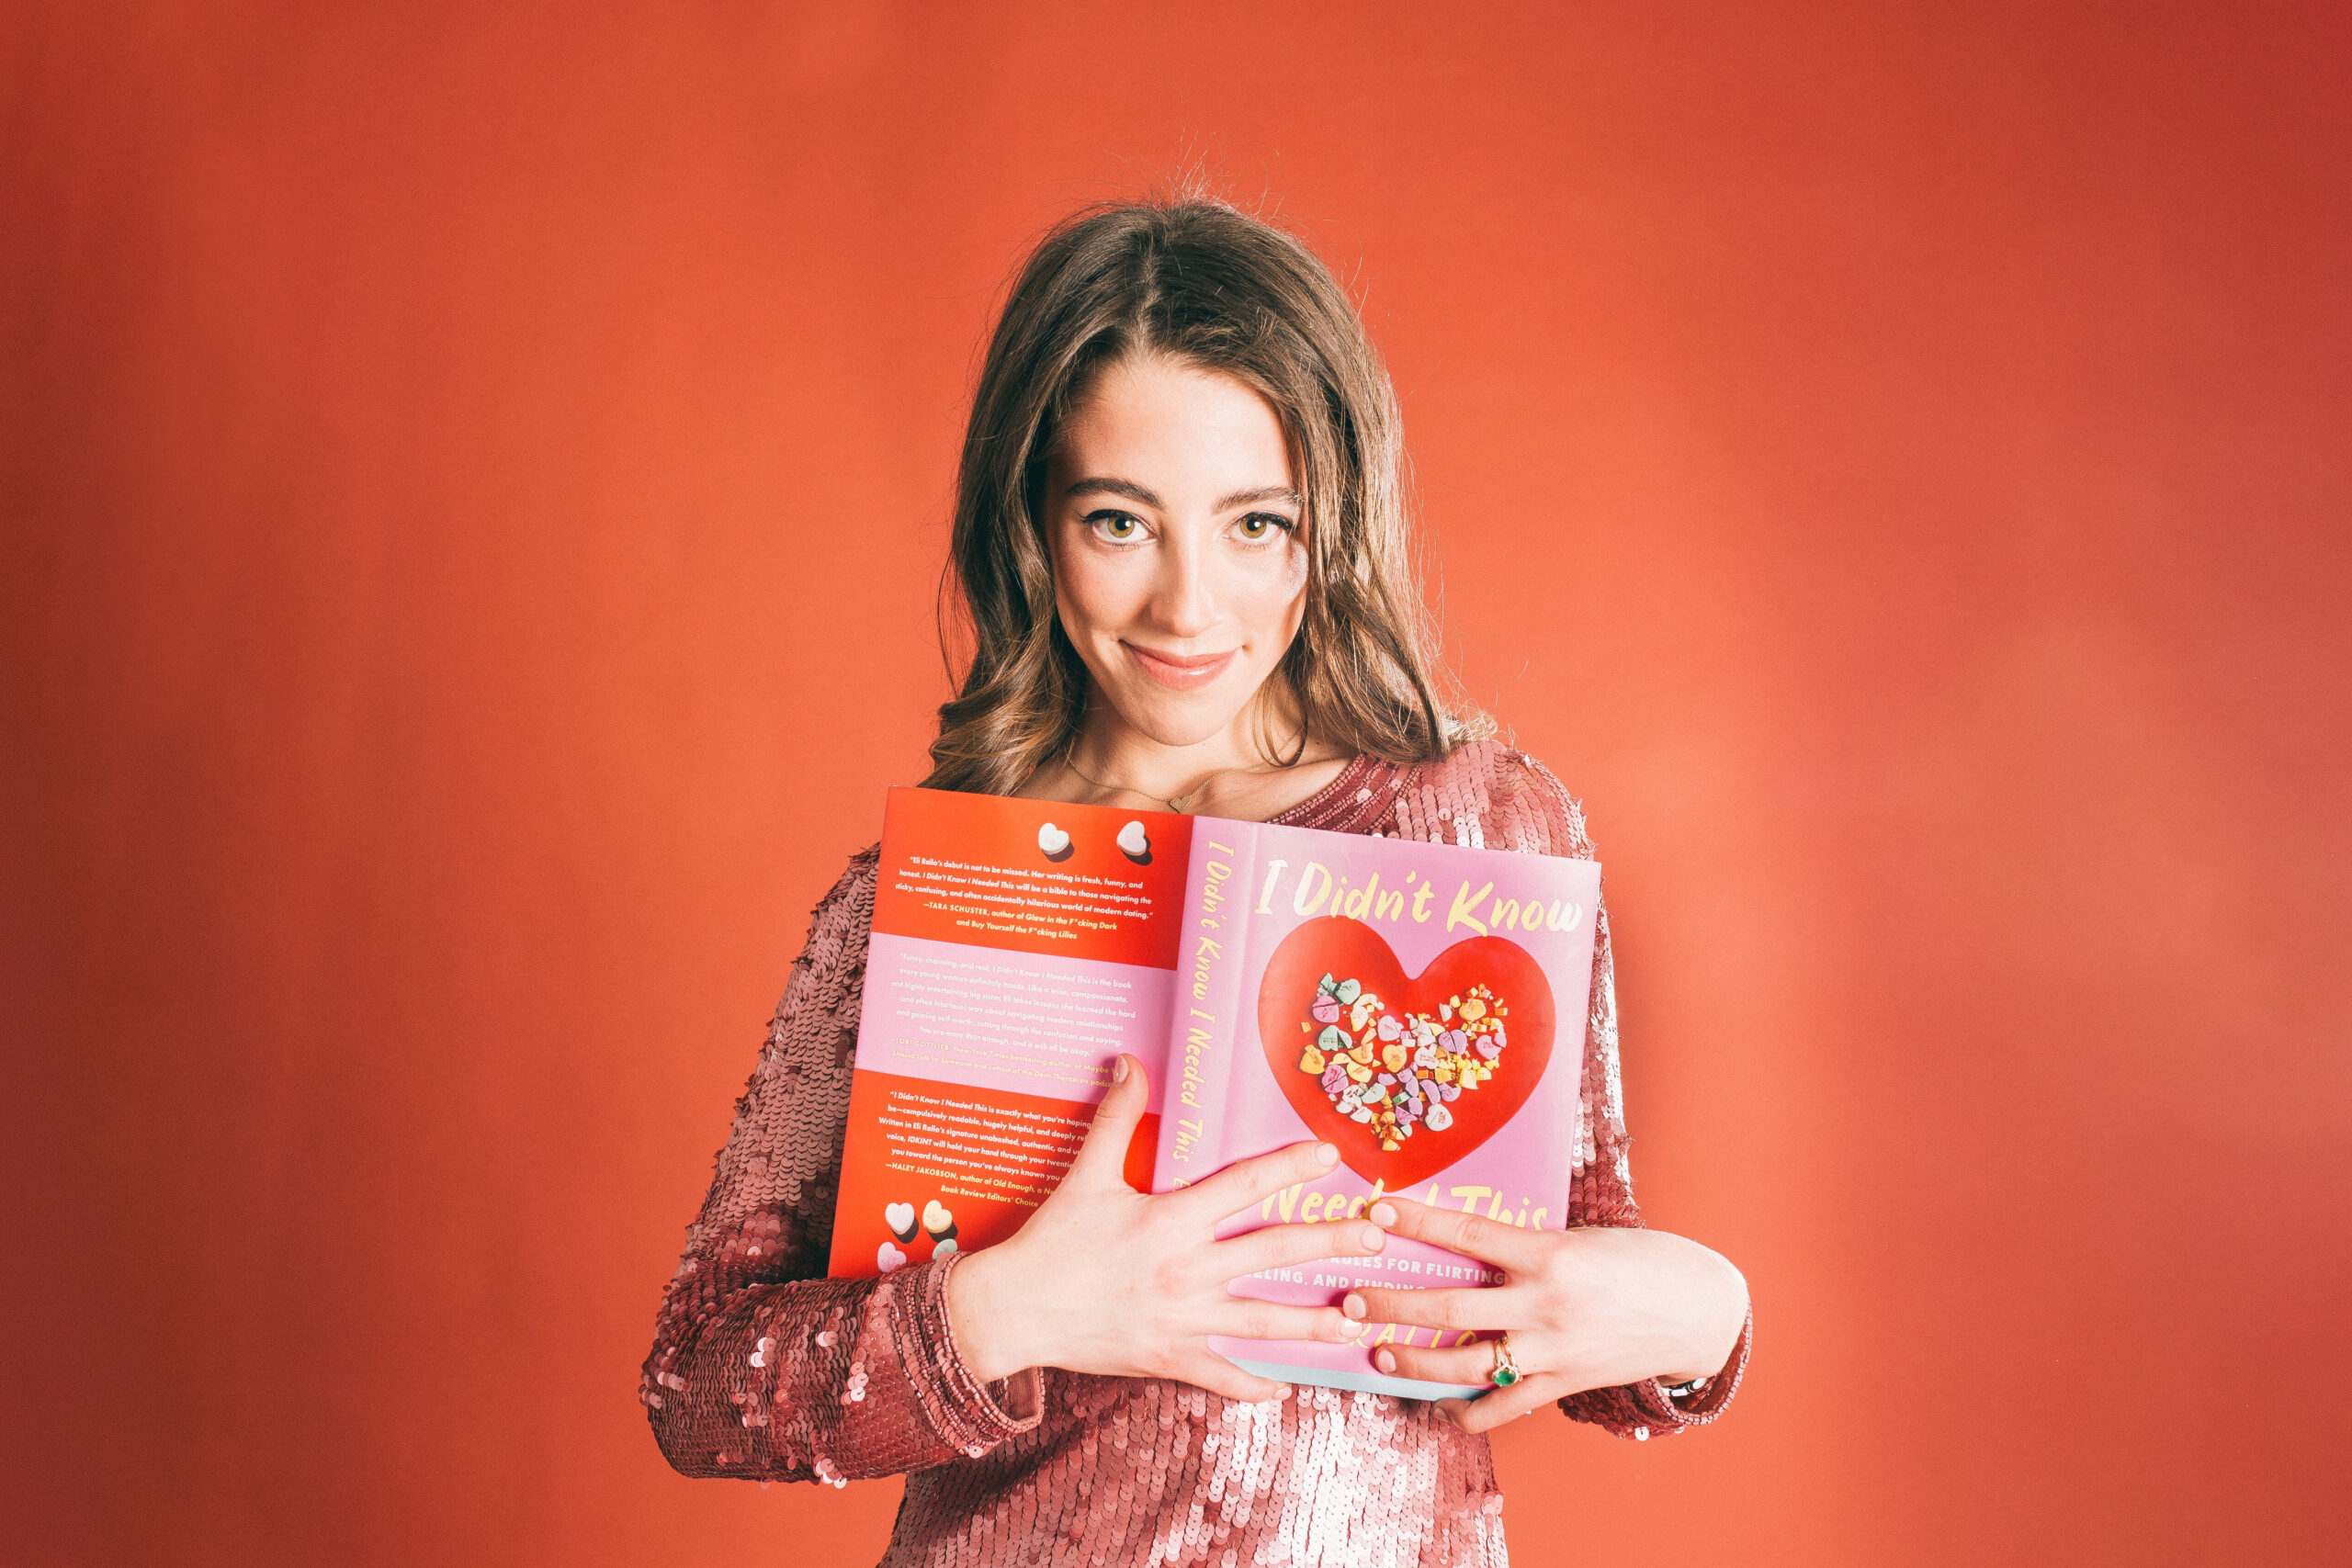 Eli Rallo in a sparkly pink dress, holds her open book to her chest in front of a red backdrop.